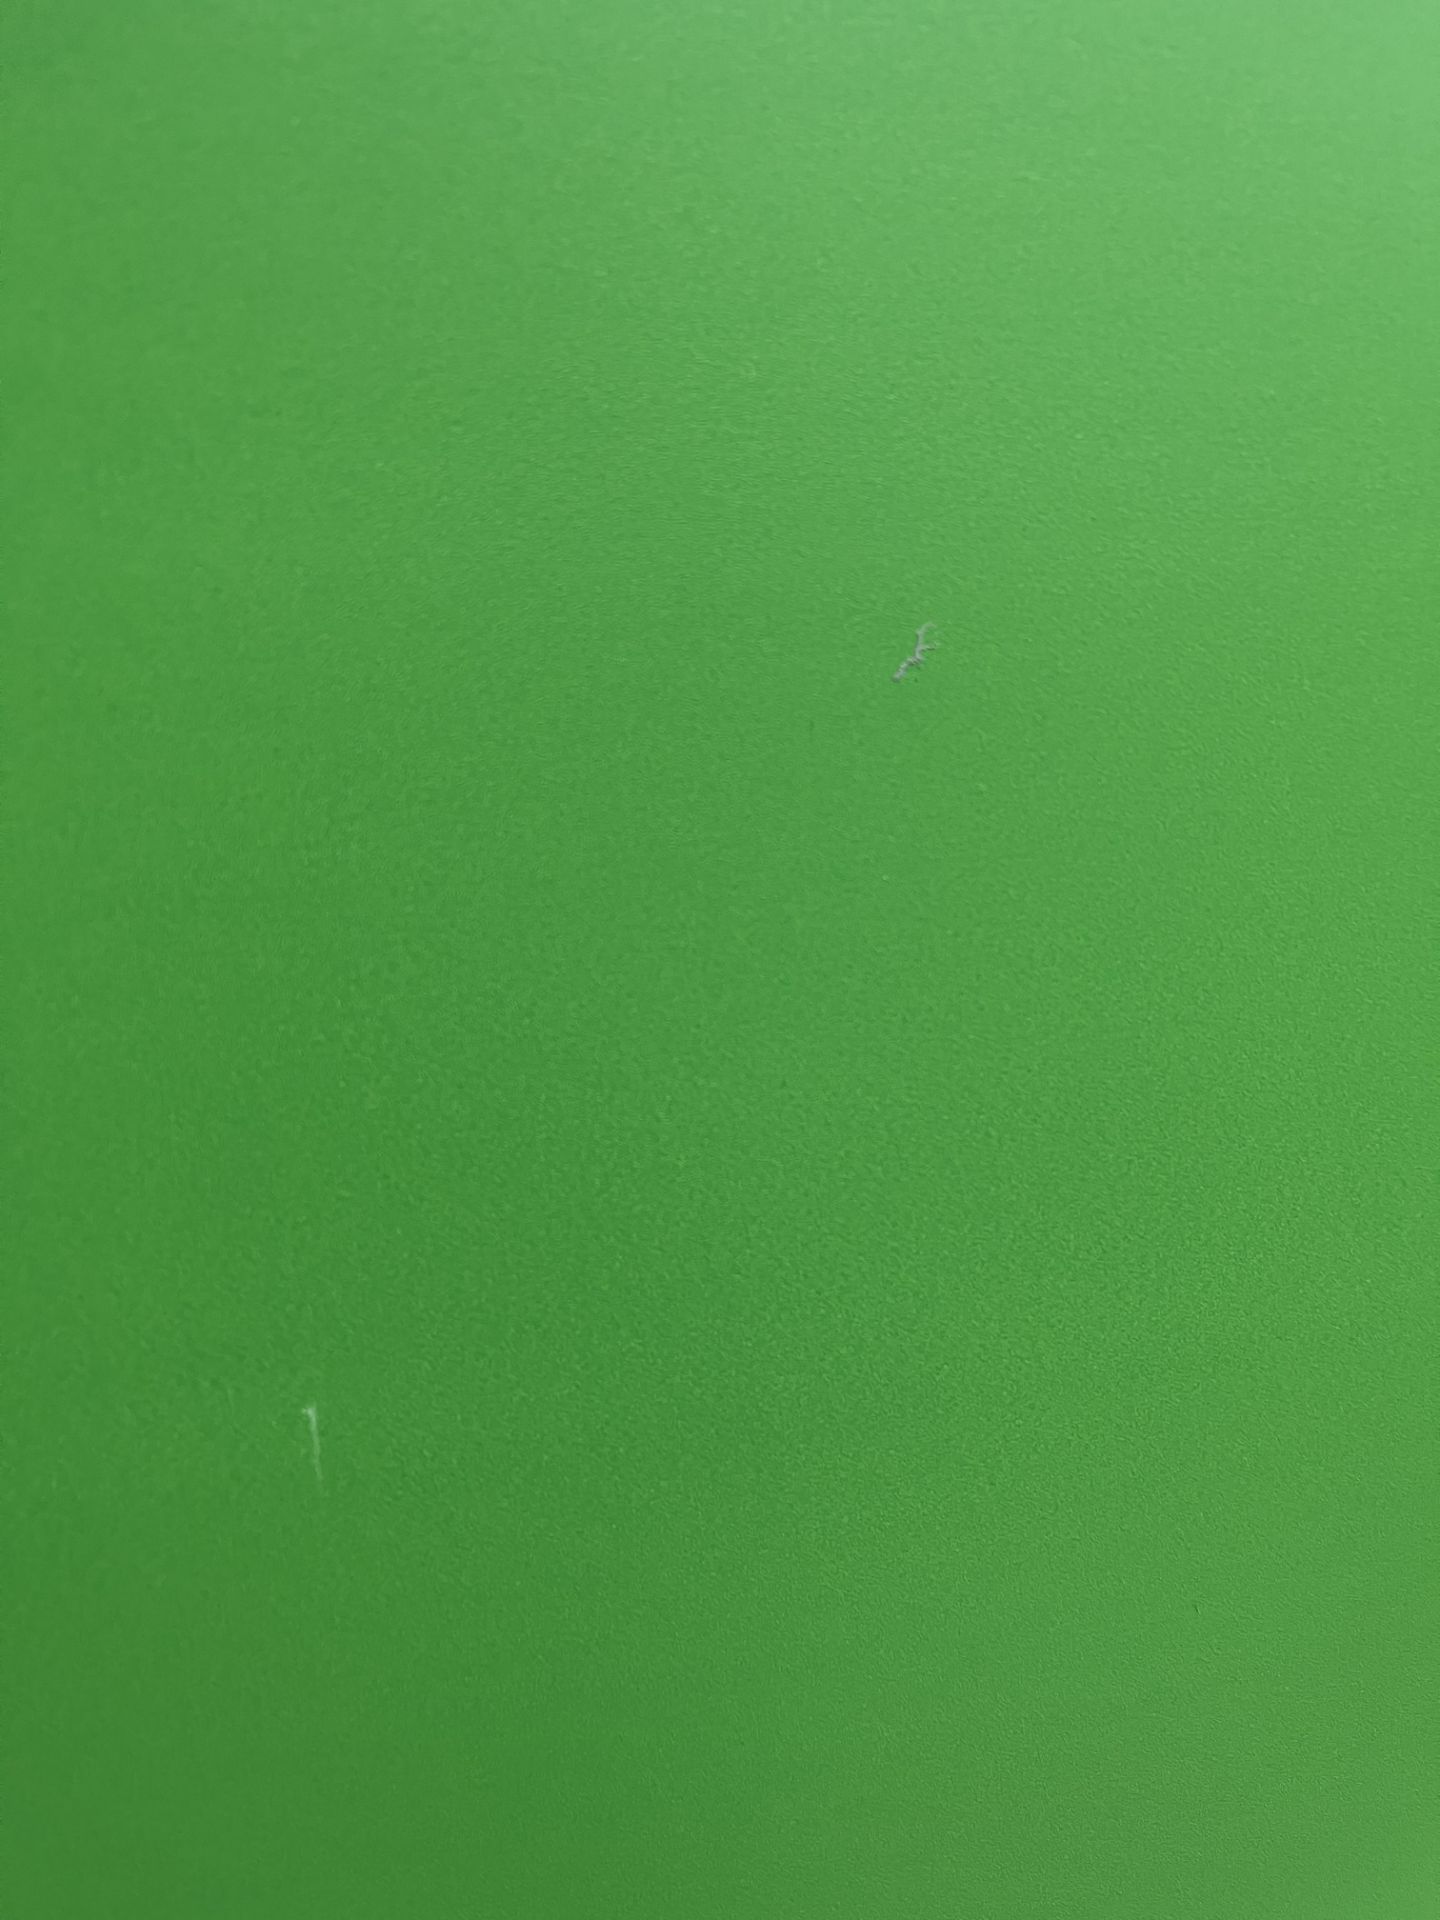 3 x Collapsable Green Screens - As pictured - Image 6 of 10